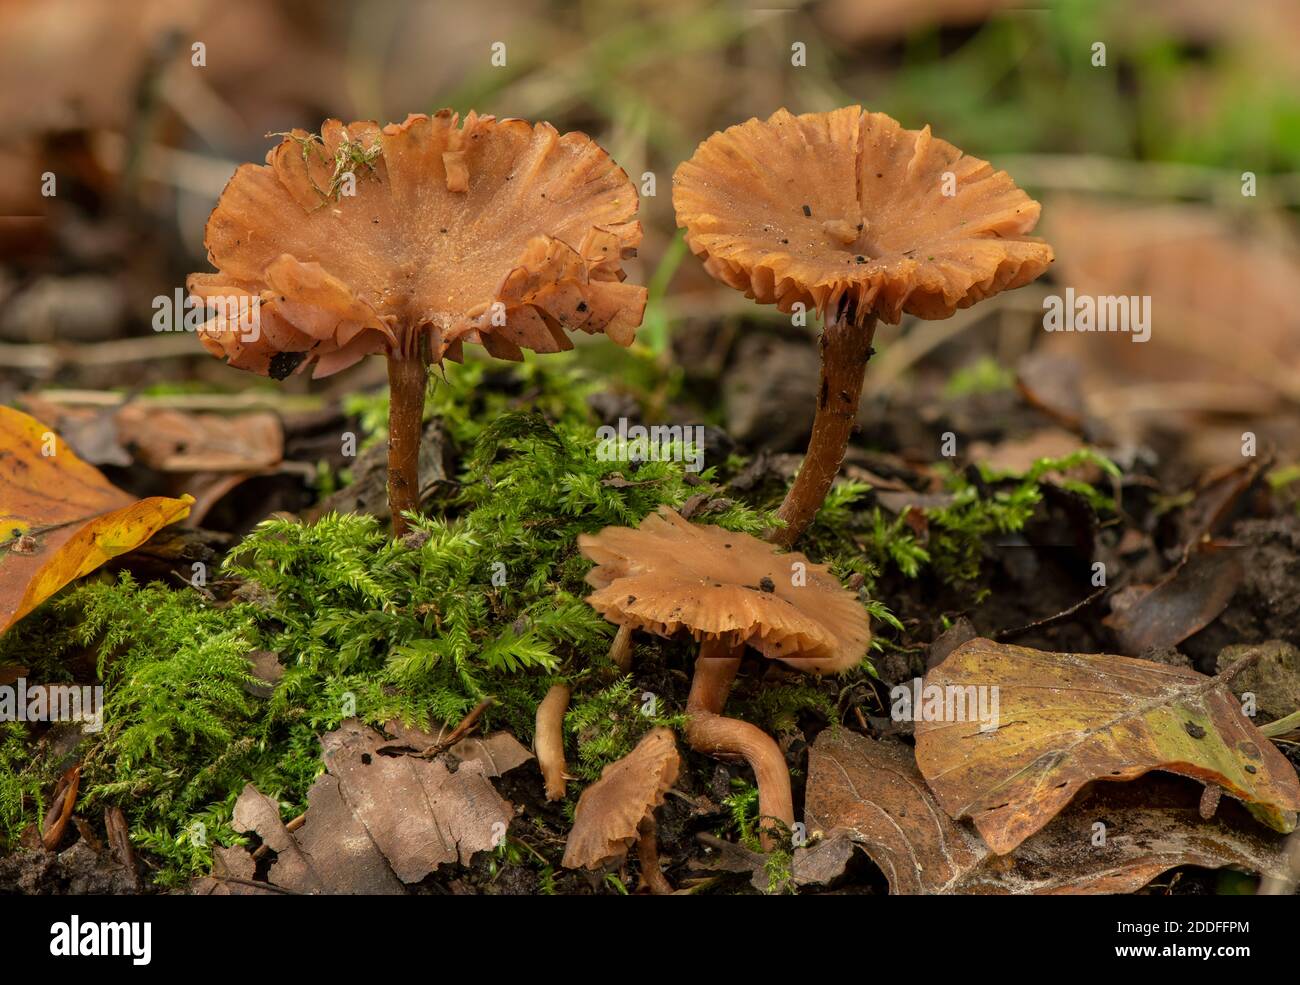 Group of The deceiver, Laccaria laccata, in beech woodland. Stock Photo